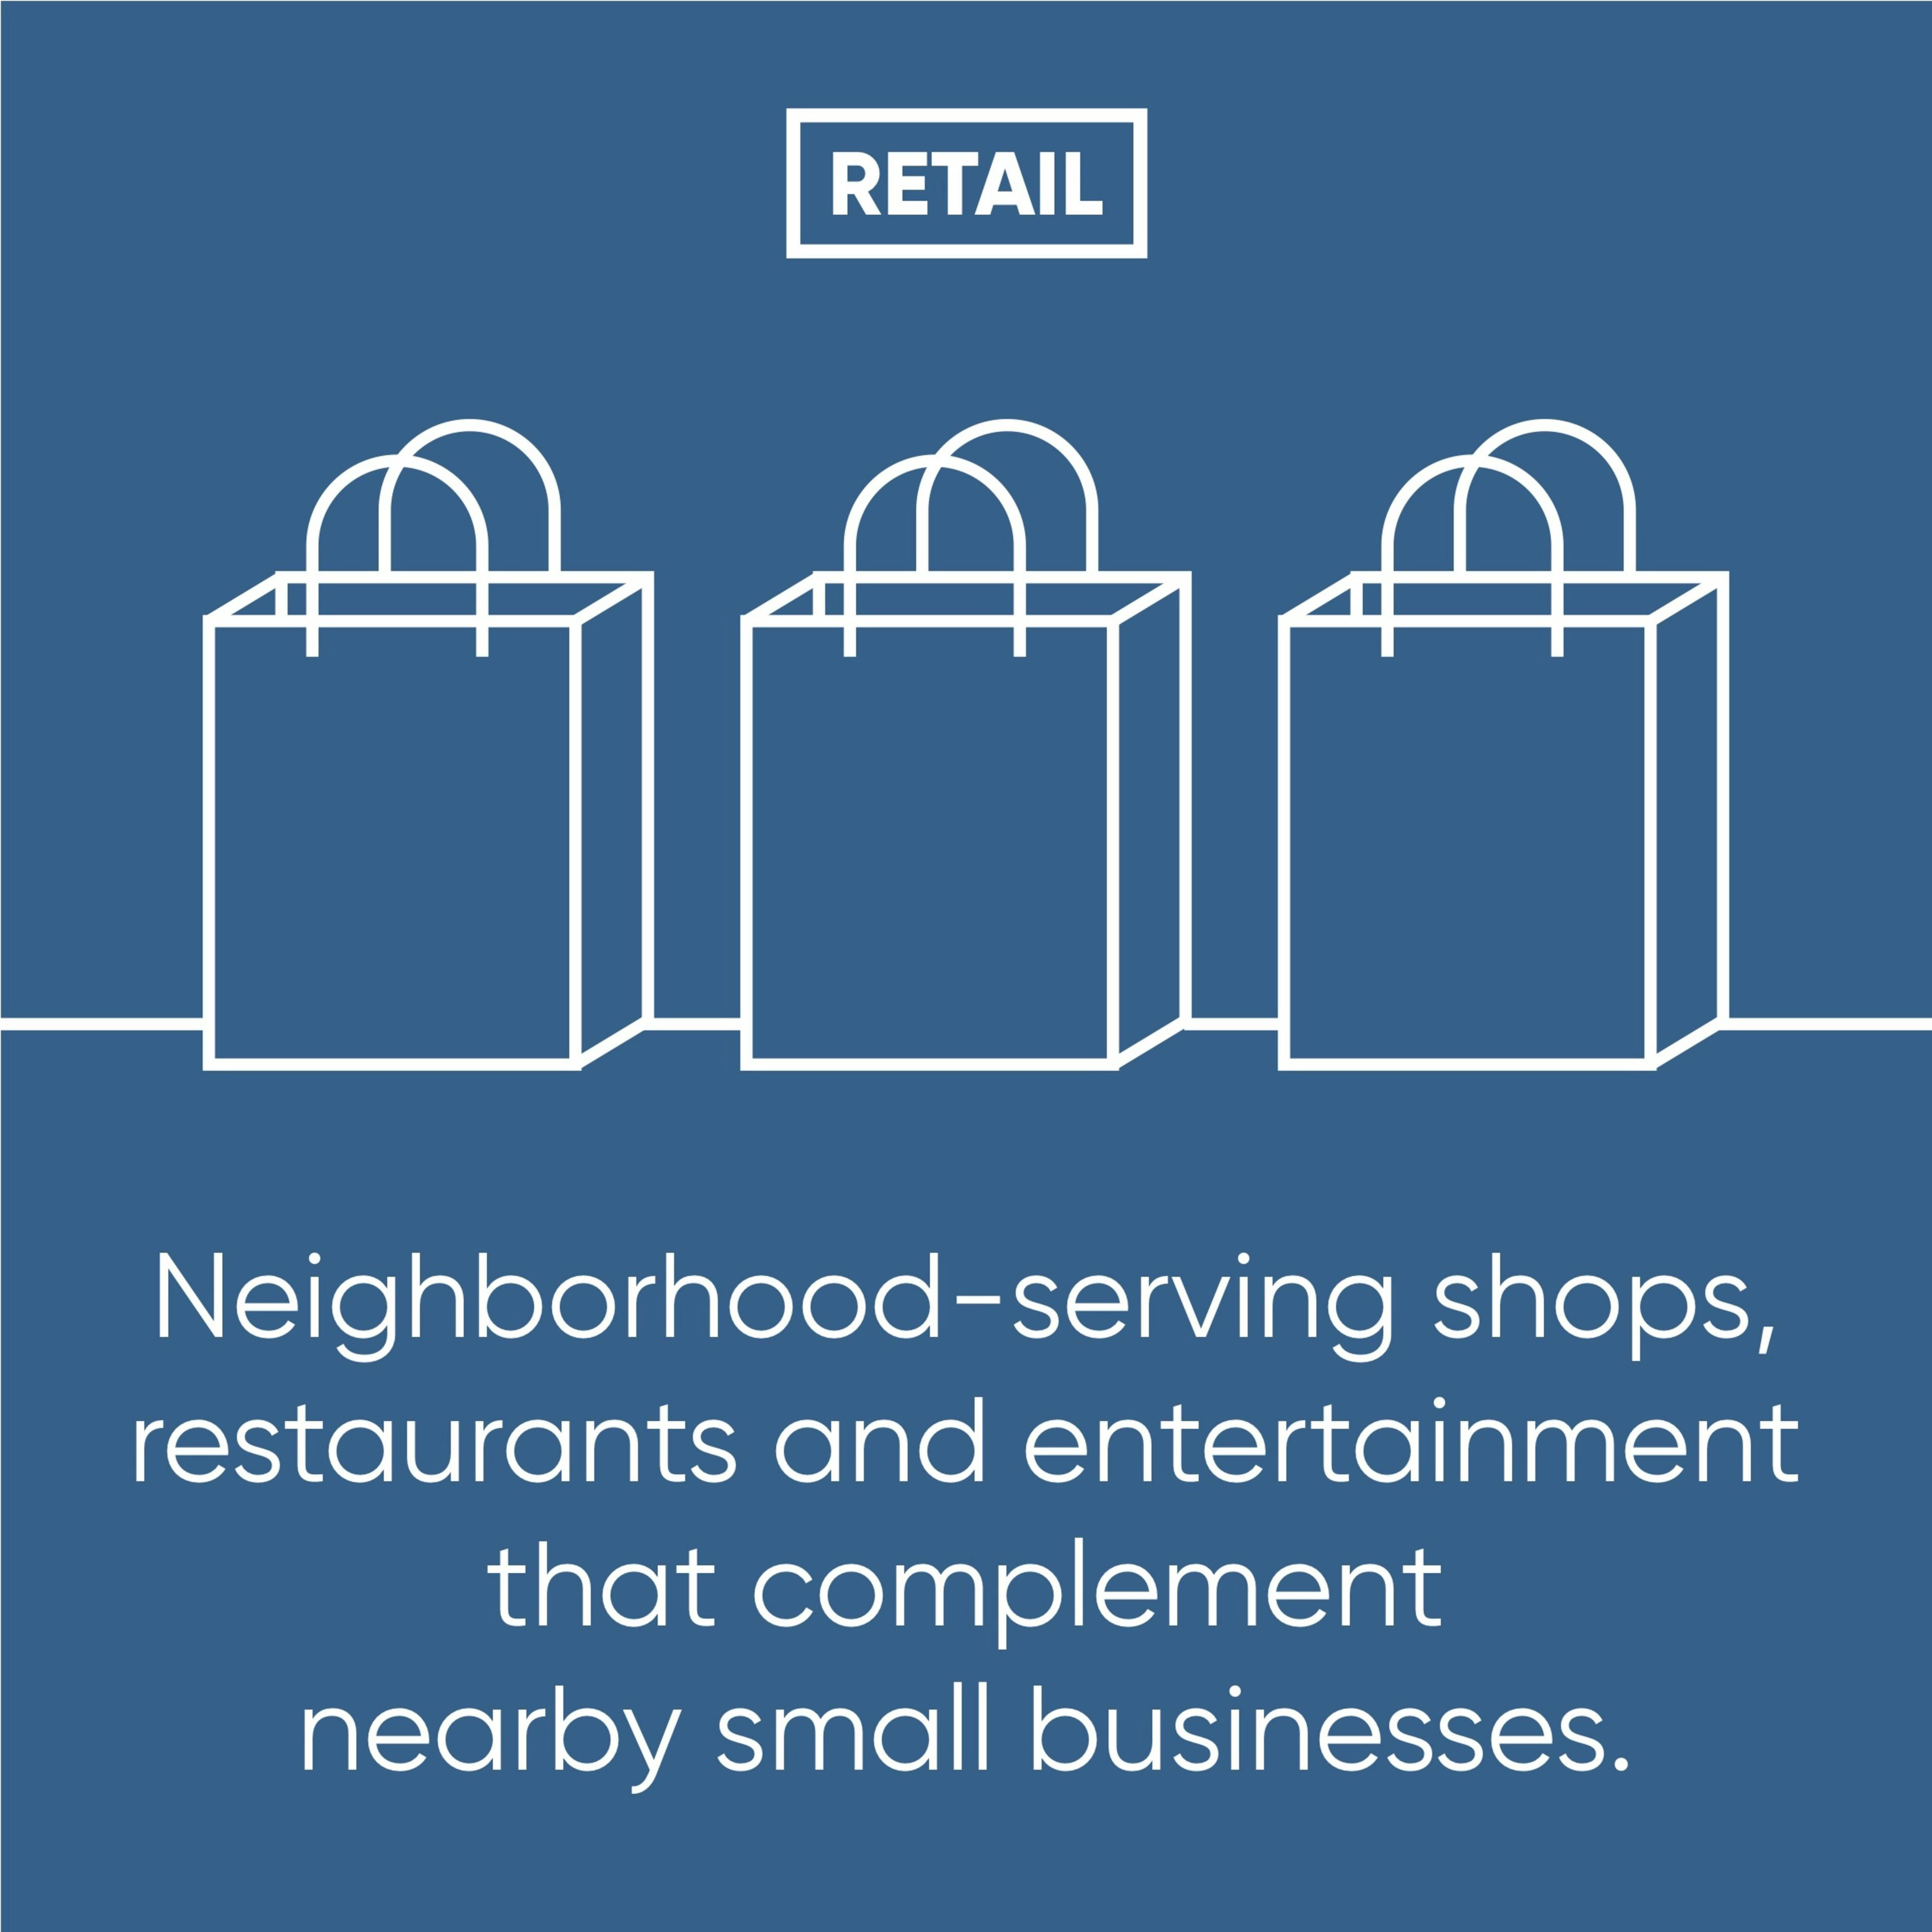 Infographic text: Retail. Neighborhood-serving shops, restaurants and entertainment that complement nearby small businesses.